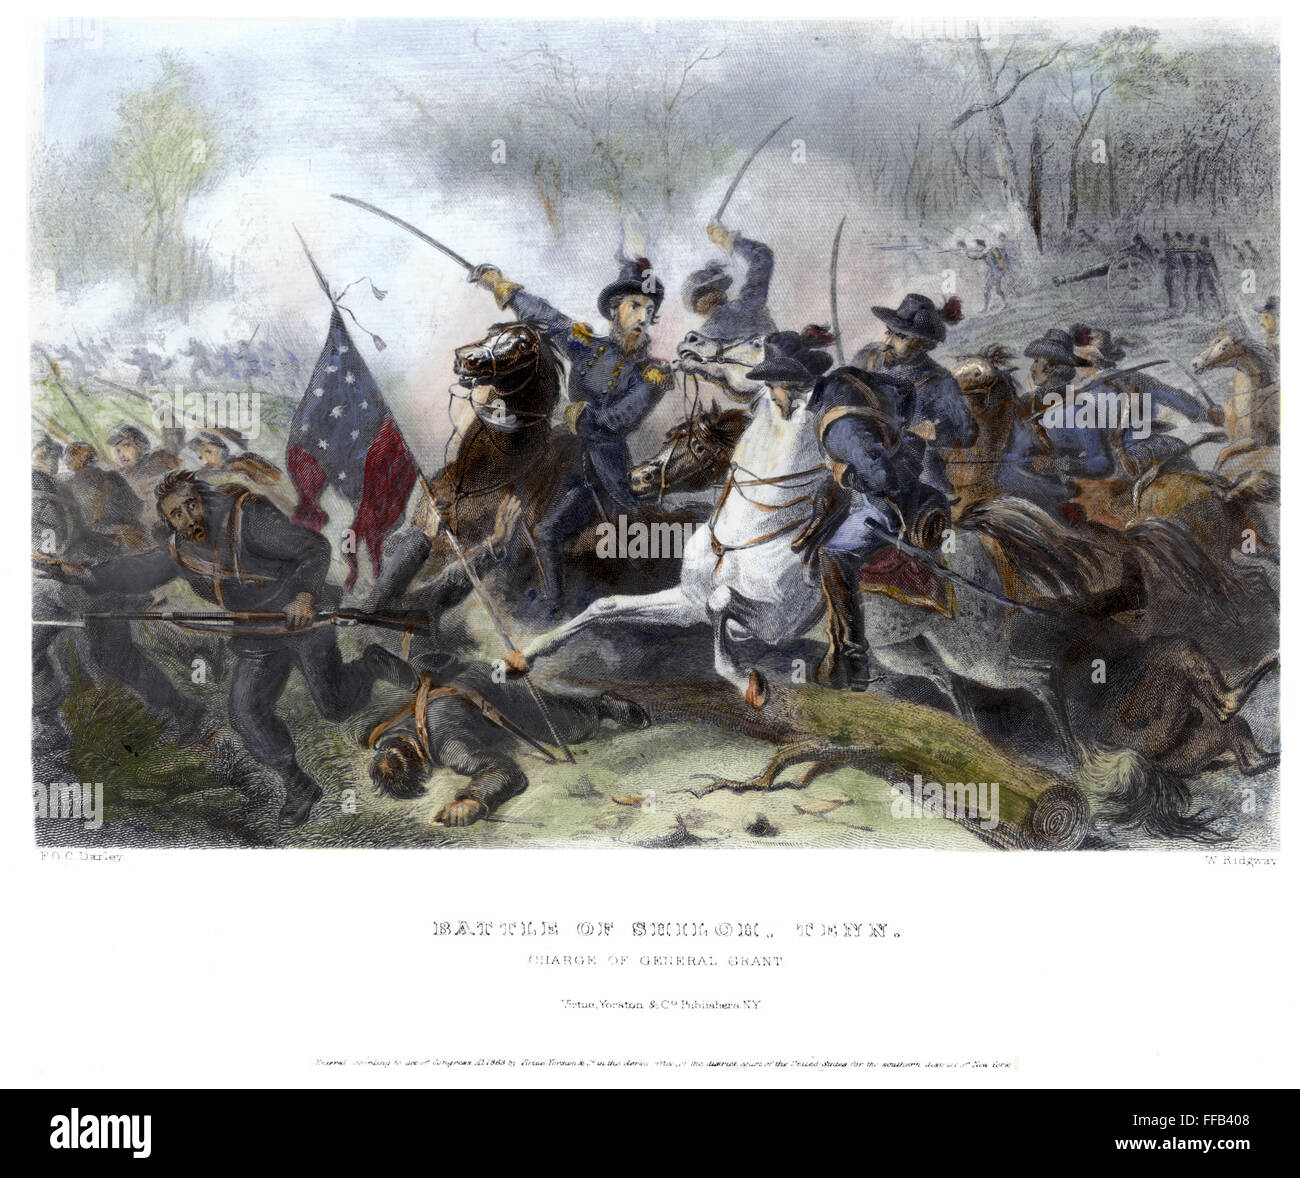 BATTLE OF SHILOH, 1862. /nGeneral Ulysses S. Grant leading Union forces at the Battle of Shiloh in Tennessee during the American Civil War, 6-7 April 1862. Steel engraving, 1863, after Felix O.C. Darley. Stock Photo